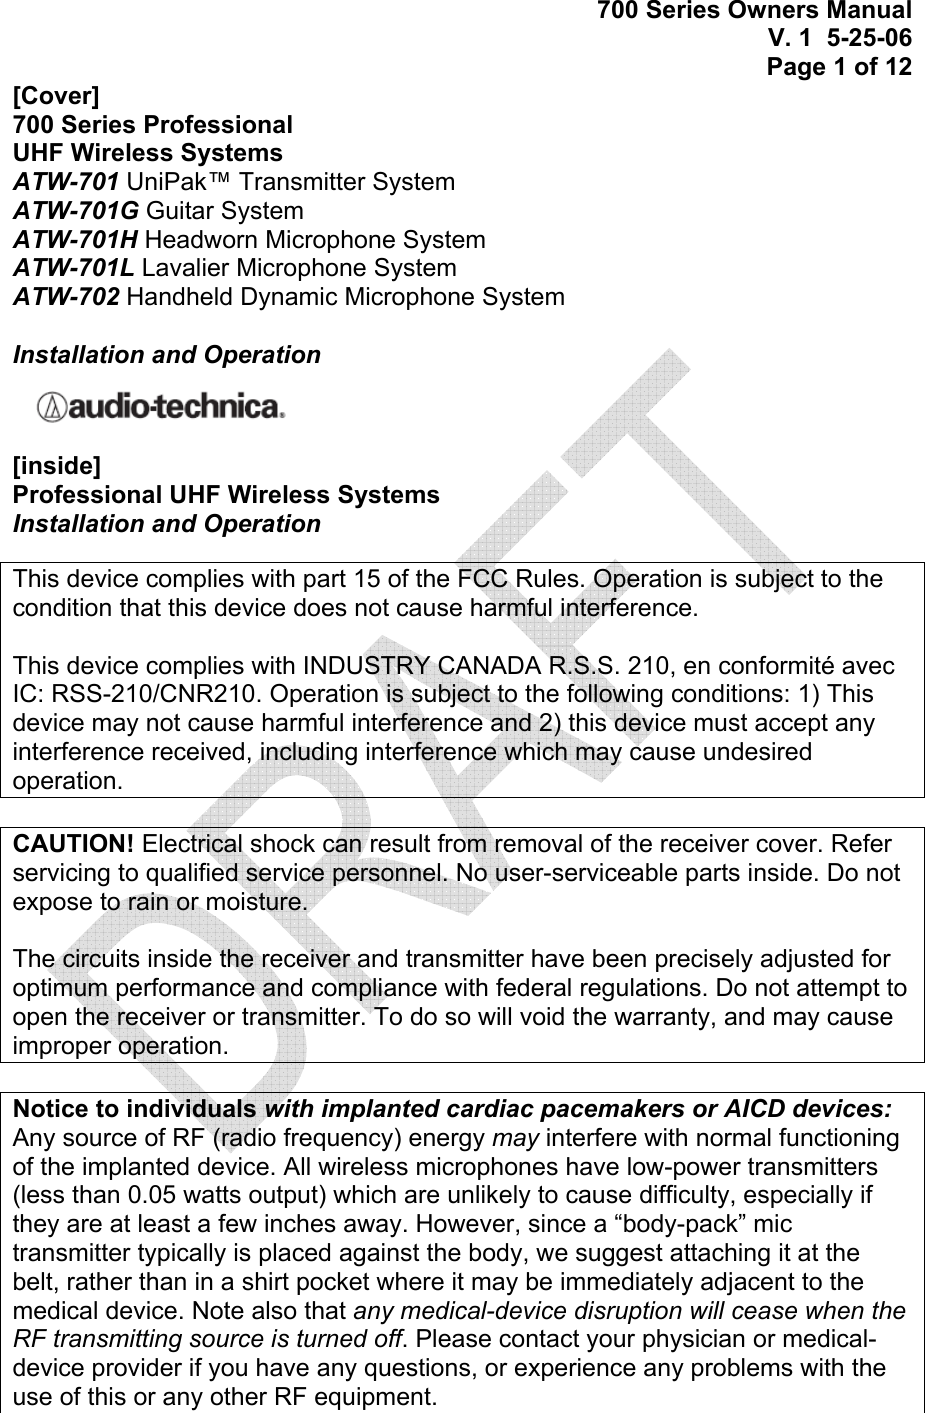 700 Series Owners Manual V. 1  5-25-06 Page 1 of 12 [Cover] 700 Series Professional  UHF Wireless Systems ATW-701 UniPak™ Transmitter System ATW-701G Guitar System ATW-701H Headworn Microphone System ATW-701L Lavalier Microphone System ATW-702 Handheld Dynamic Microphone System  Installation and Operation  [inside] Professional UHF Wireless Systems Installation and Operation  This device complies with part 15 of the FCC Rules. Operation is subject to the condition that this device does not cause harmful interference.  This device complies with INDUSTRY CANADA R.S.S. 210, en conformité avec IC: RSS-210/CNR210. Operation is subject to the following conditions: 1) This device may not cause harmful interference and 2) this device must accept any interference received, including interference which may cause undesired operation.  CAUTION! Electrical shock can result from removal of the receiver cover. Refer servicing to qualified service personnel. No user-serviceable parts inside. Do not expose to rain or moisture.  The circuits inside the receiver and transmitter have been precisely adjusted for optimum performance and compliance with federal regulations. Do not attempt to open the receiver or transmitter. To do so will void the warranty, and may cause improper operation.  Notice to individuals with implanted cardiac pacemakers or AICD devices: Any source of RF (radio frequency) energy may interfere with normal functioning of the implanted device. All wireless microphones have low-power transmitters (less than 0.05 watts output) which are unlikely to cause difficulty, especially if they are at least a few inches away. However, since a “body-pack” mic transmitter typically is placed against the body, we suggest attaching it at the belt, rather than in a shirt pocket where it may be immediately adjacent to the medical device. Note also that any medical-device disruption will cease when the RF transmitting source is turned off. Please contact your physician or medical-device provider if you have any questions, or experience any problems with the use of this or any other RF equipment. 